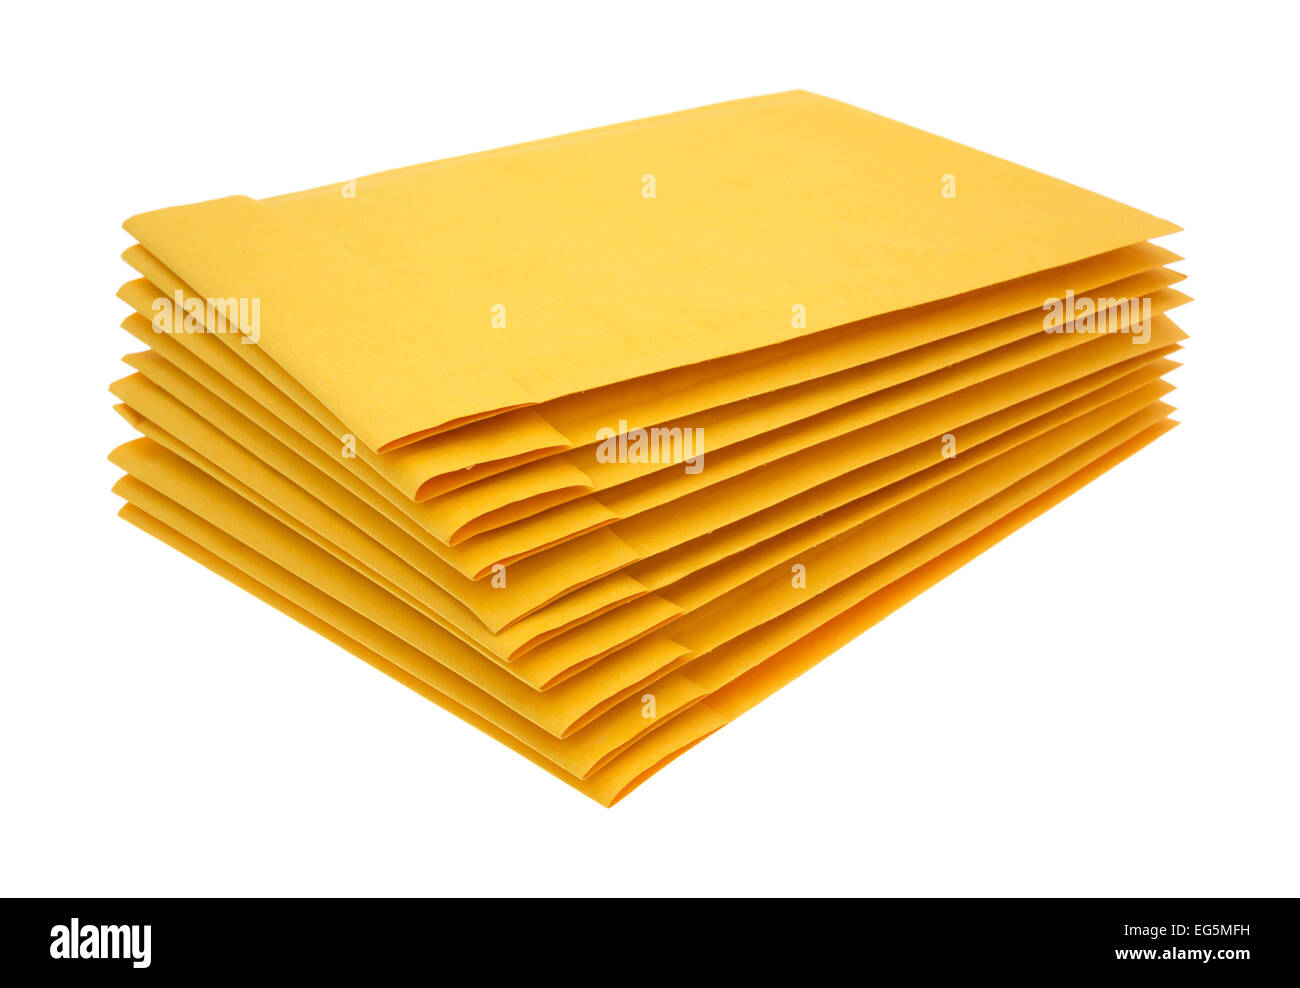 Side view of a blank padded manila envelopes fanned out at an angle on a white background. Stock Photo